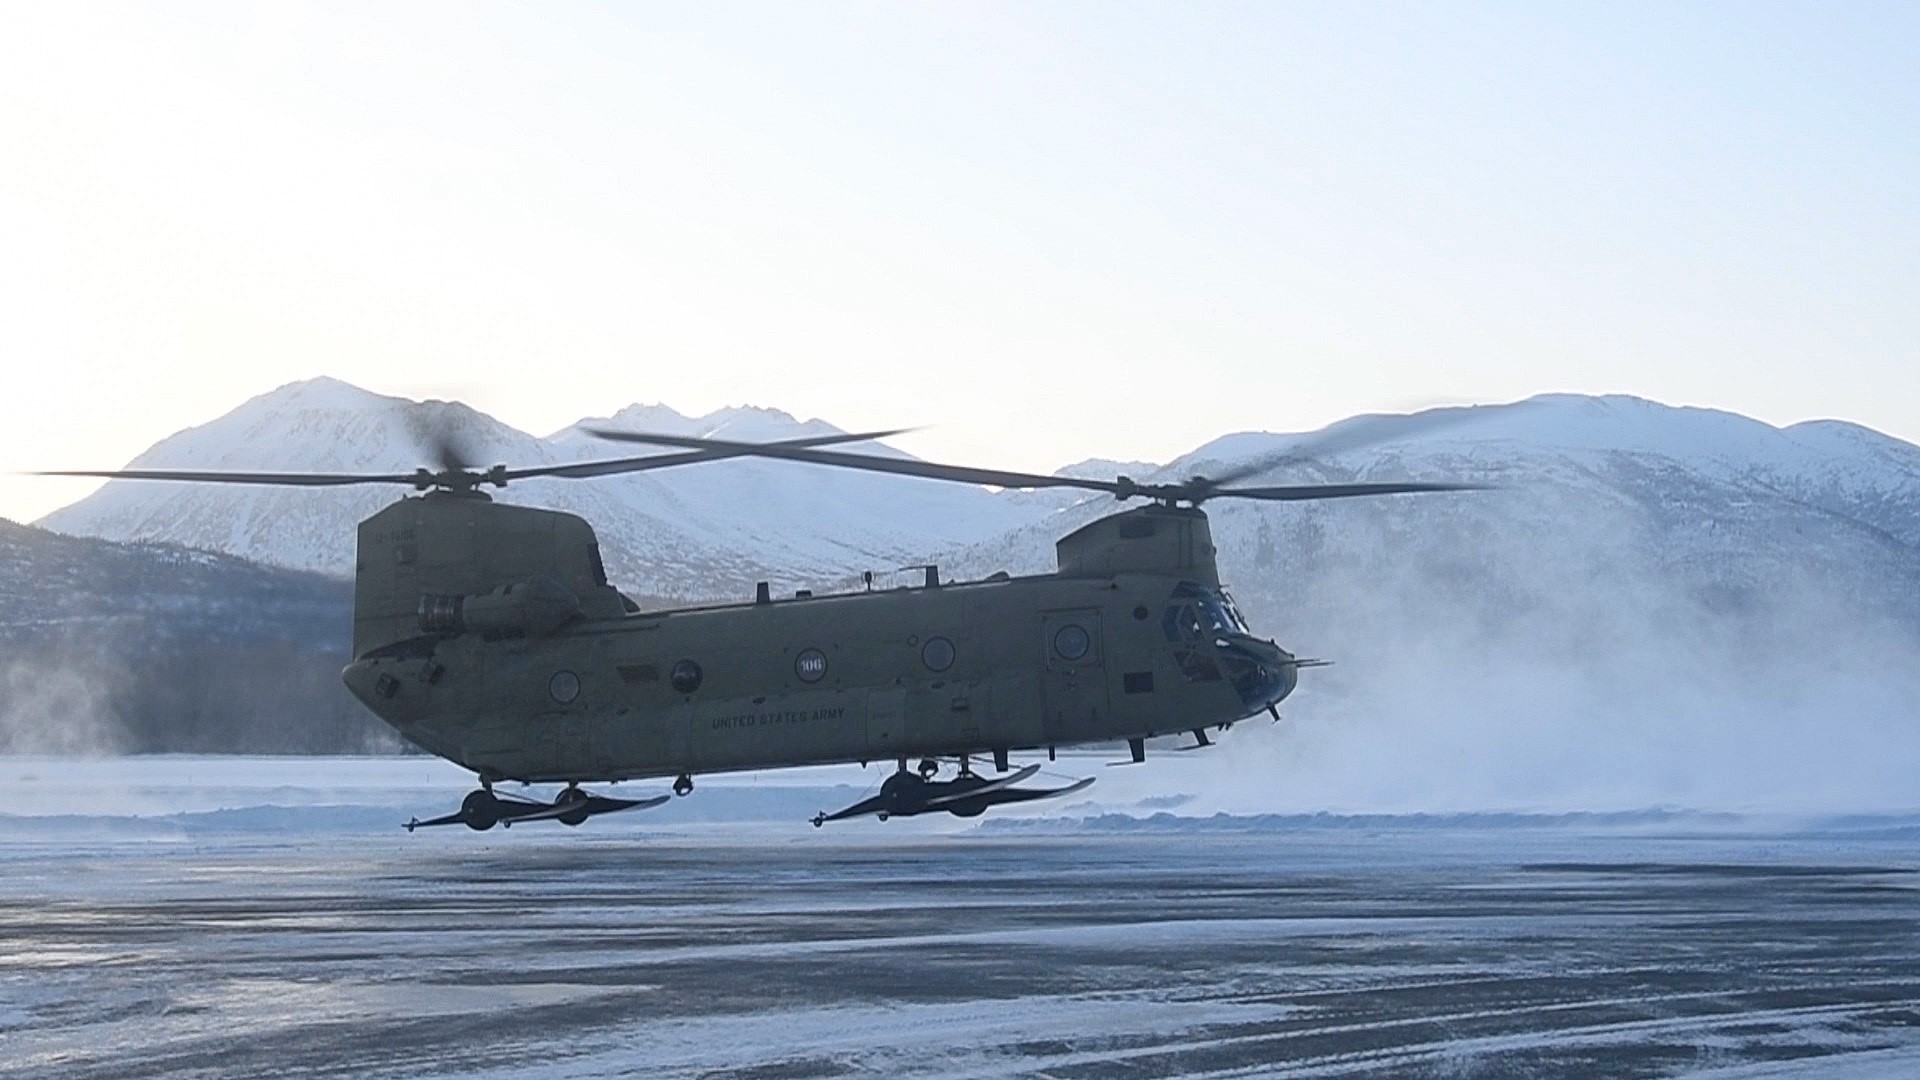 A U.S. Army National Guard CH-47 Chinook takes flight for exercise Arctic Eagle 2020 on Feb. 24, 2020, at Joint Base Elmendorf-Richardson, Alaska. The drill is meant to benefit homeland security and emergency response operations in the northern U.S. state. (Alaska National Guard)